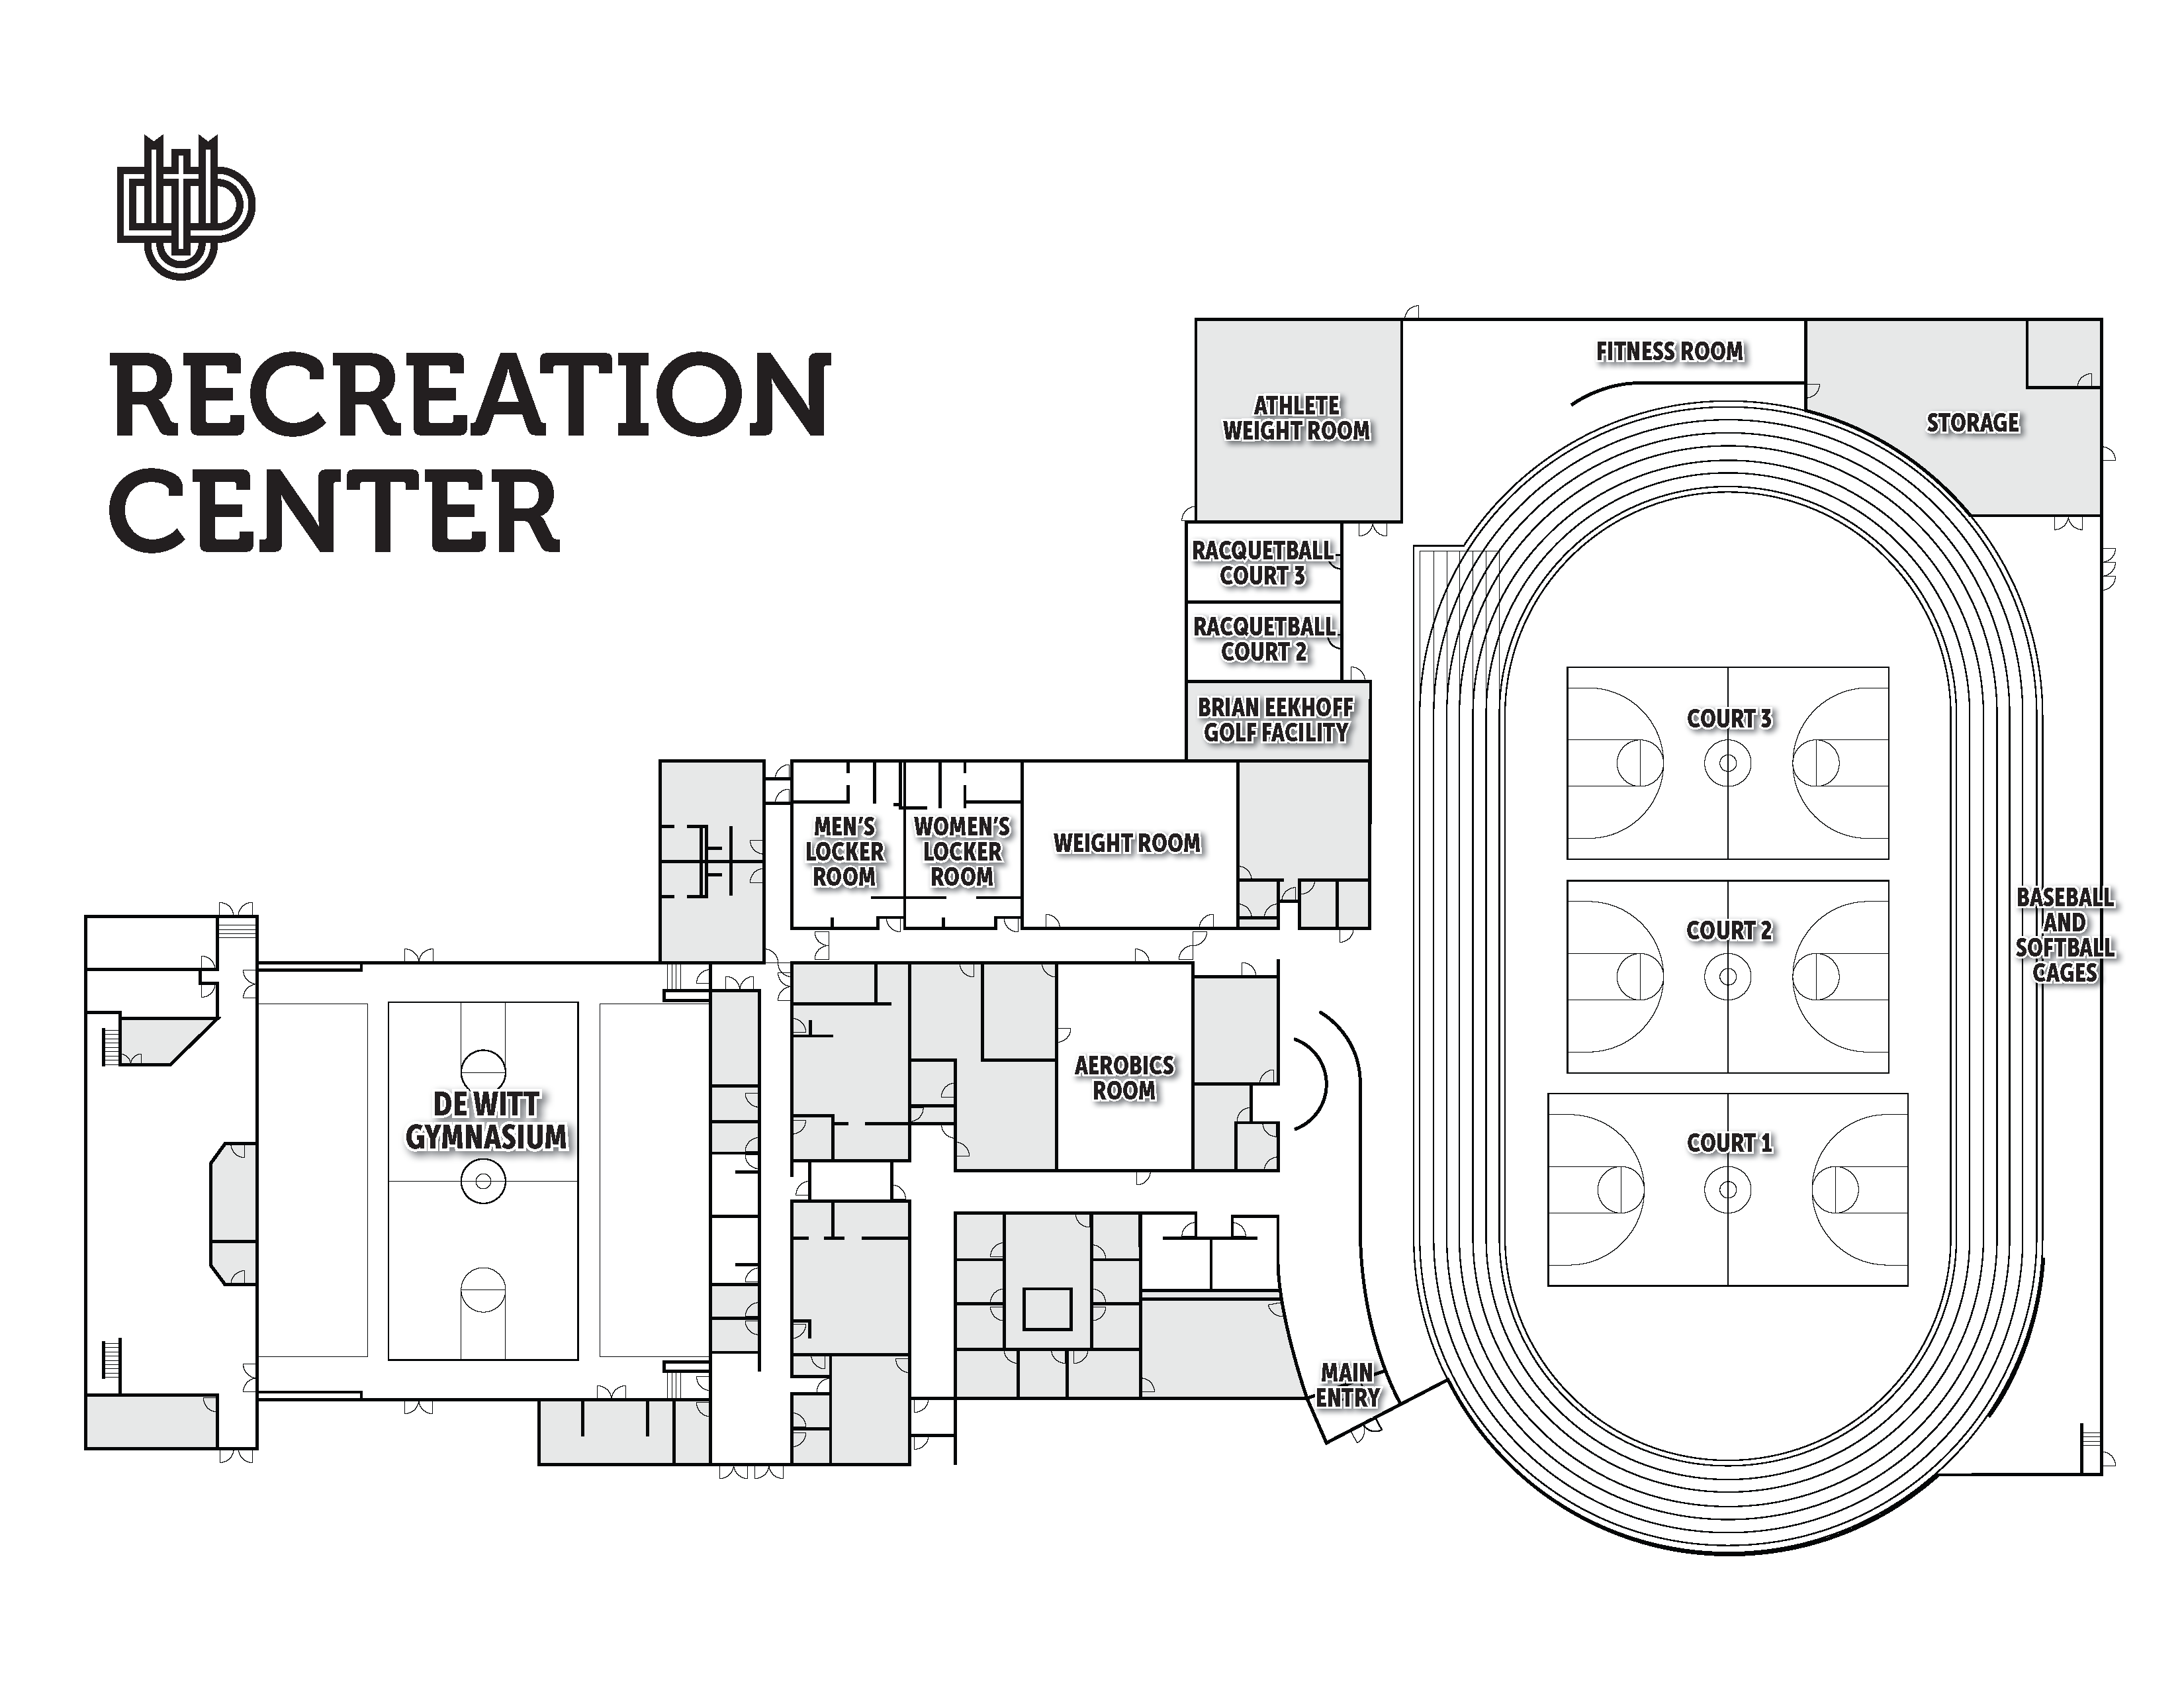 A picture of the rec center floor plan